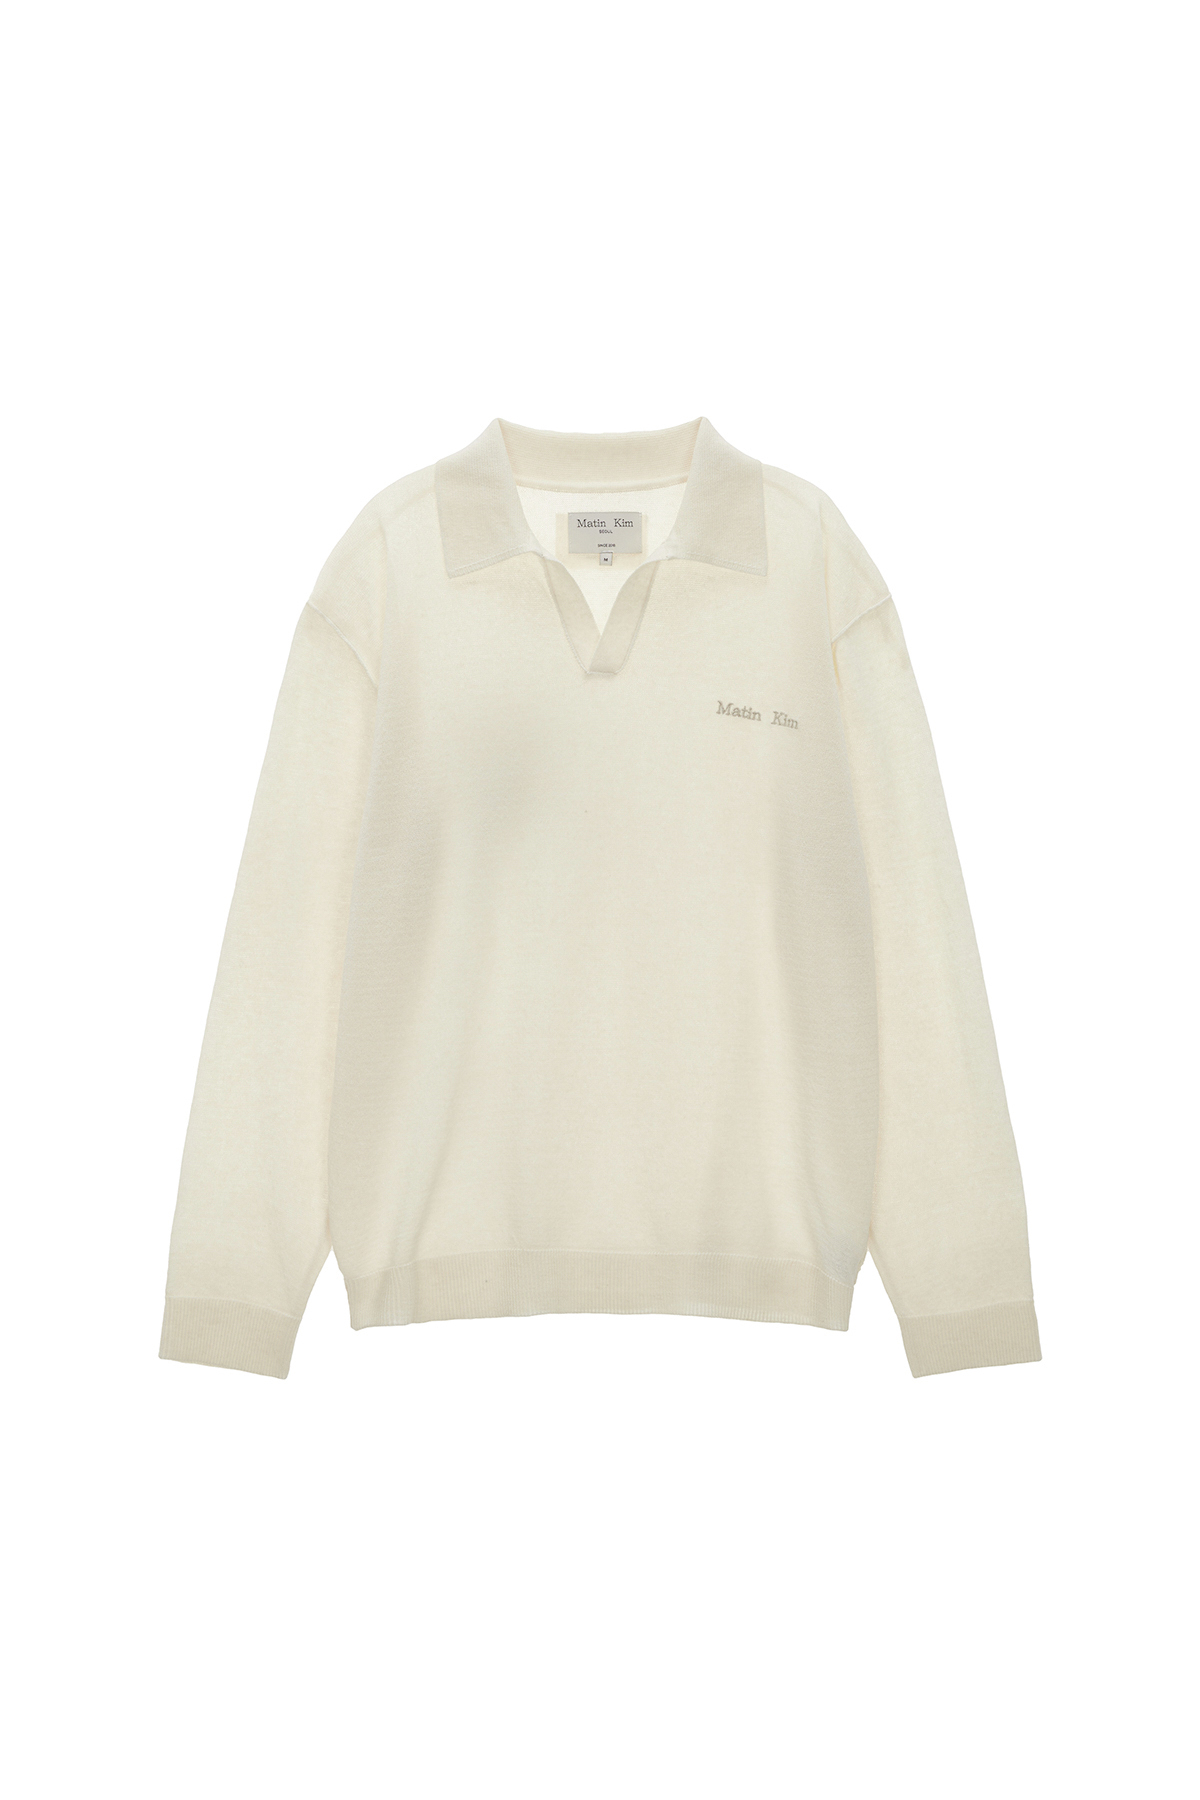 SHEER OPEN COLLAR KNIT TOP FOR MEN IN IVORY